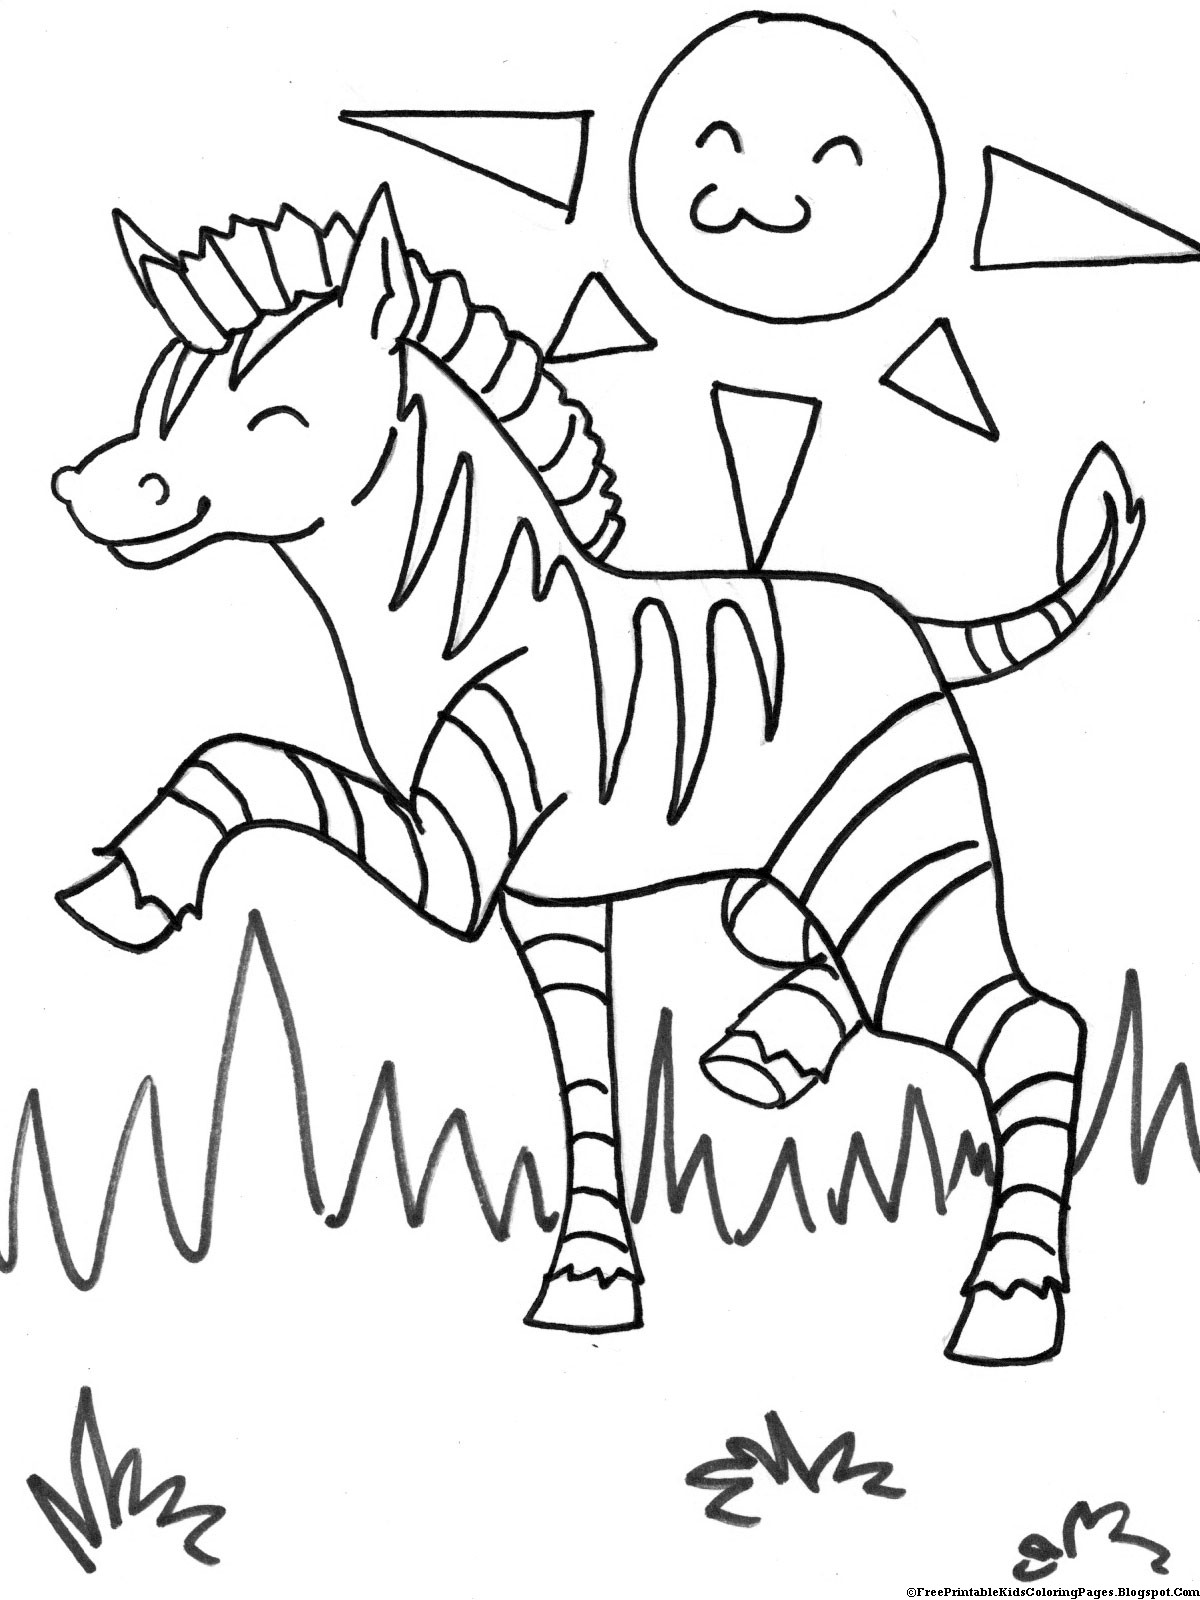 Coloring Pages For Kids Printable
 Zebra Coloring Pages Free Printable Kids Coloring Pages